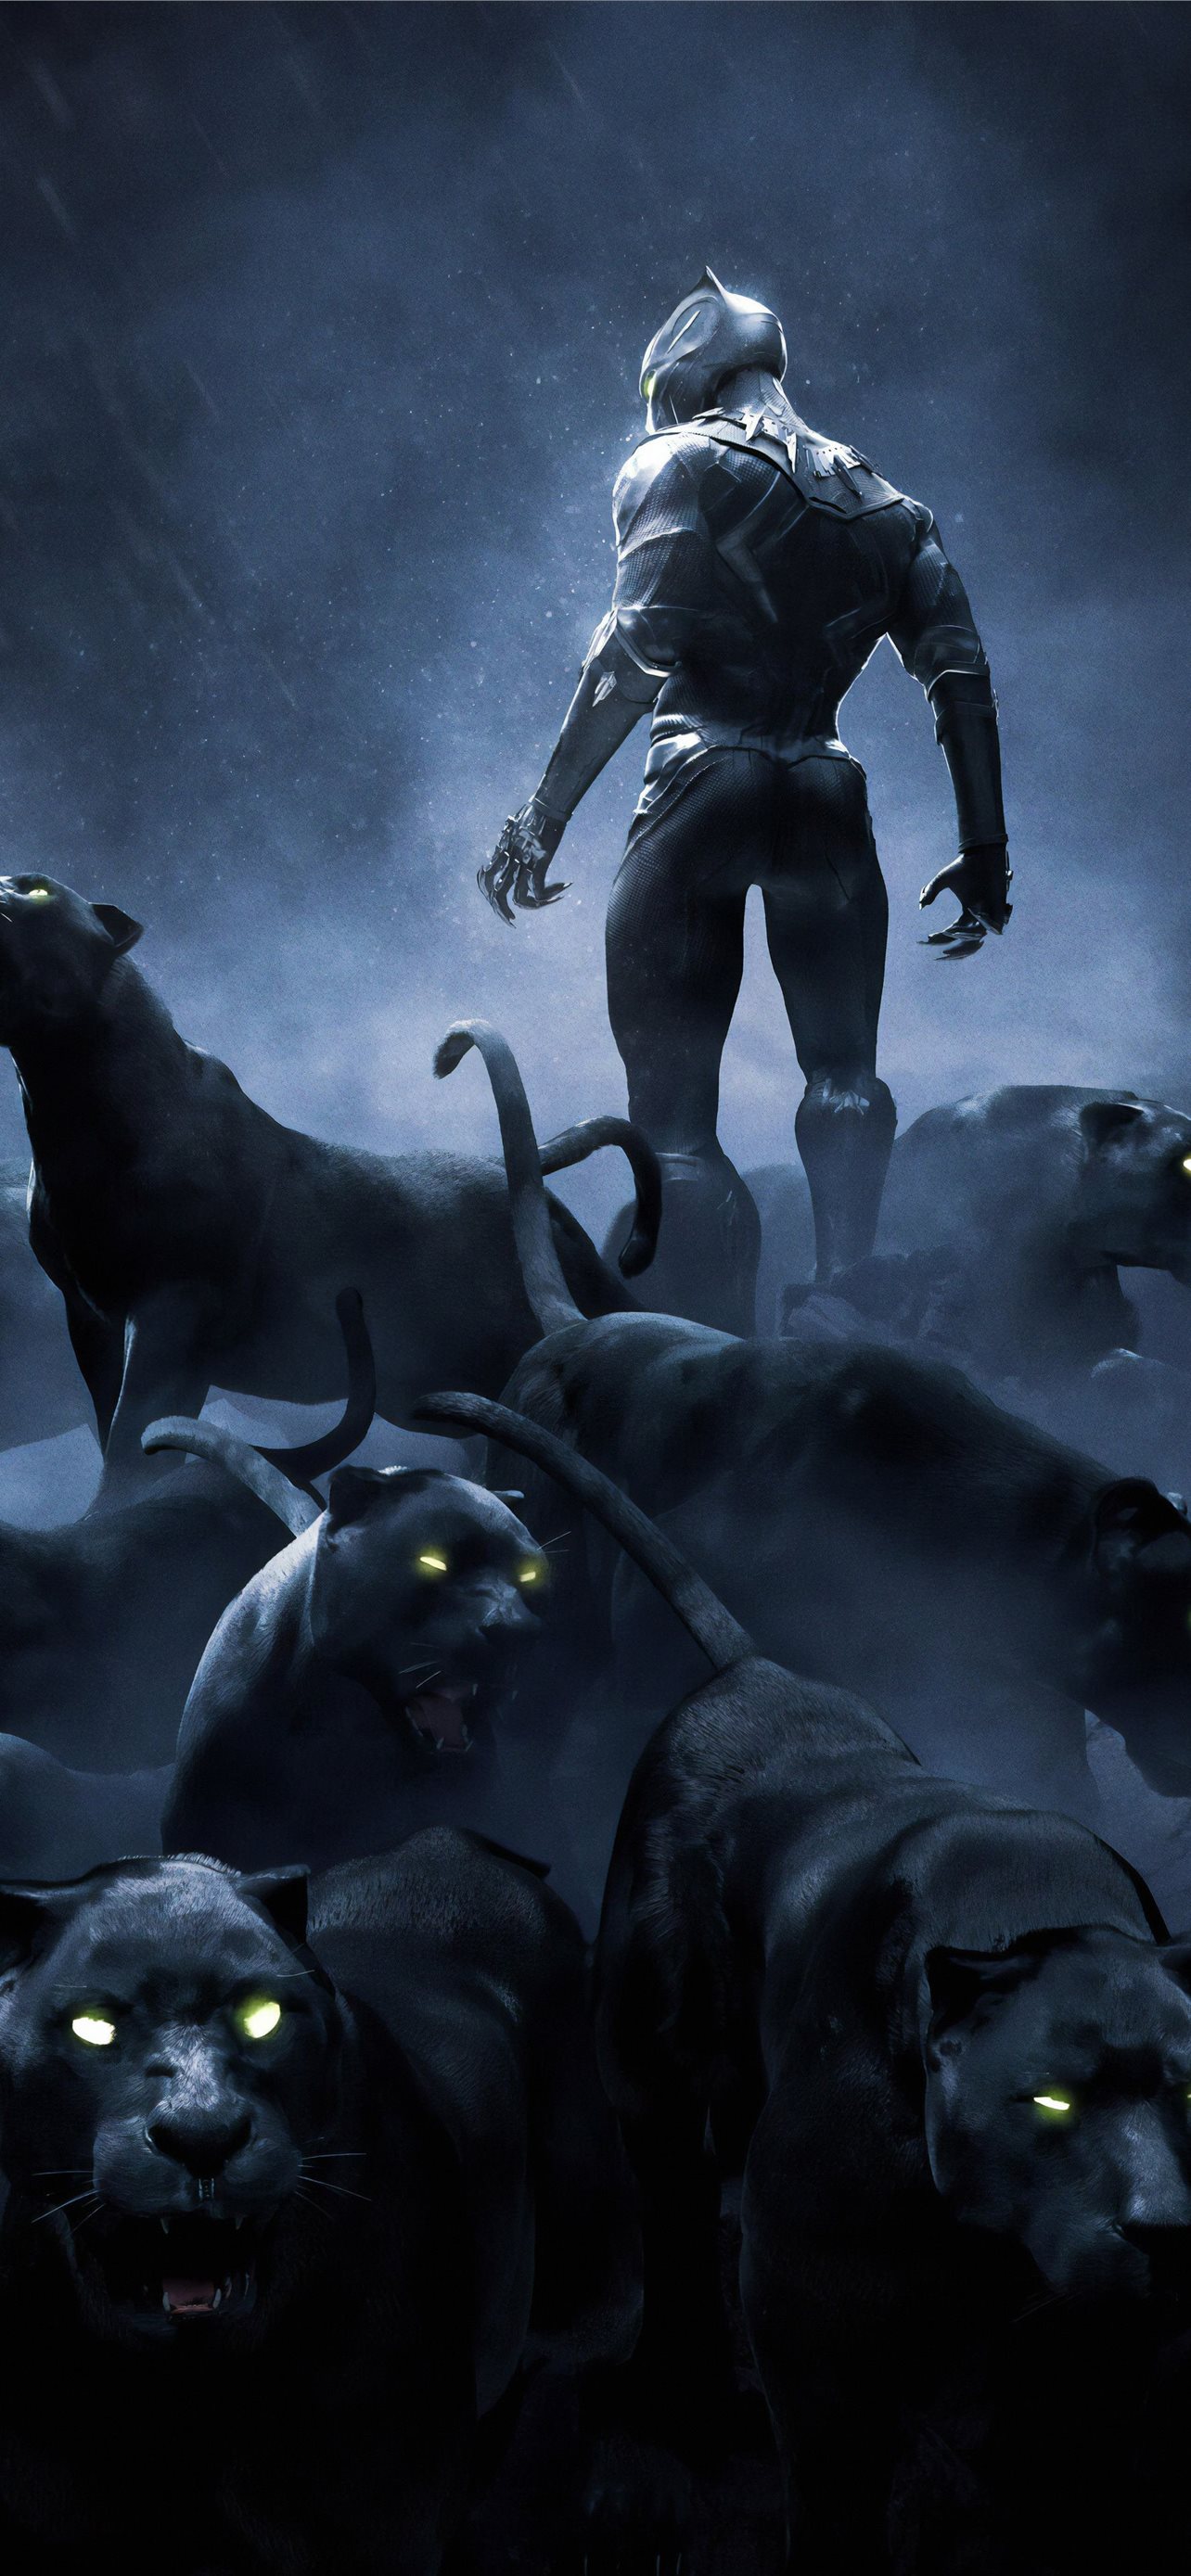 4K Black Panther Wallpaper HDAmazoncomAppstore for Android